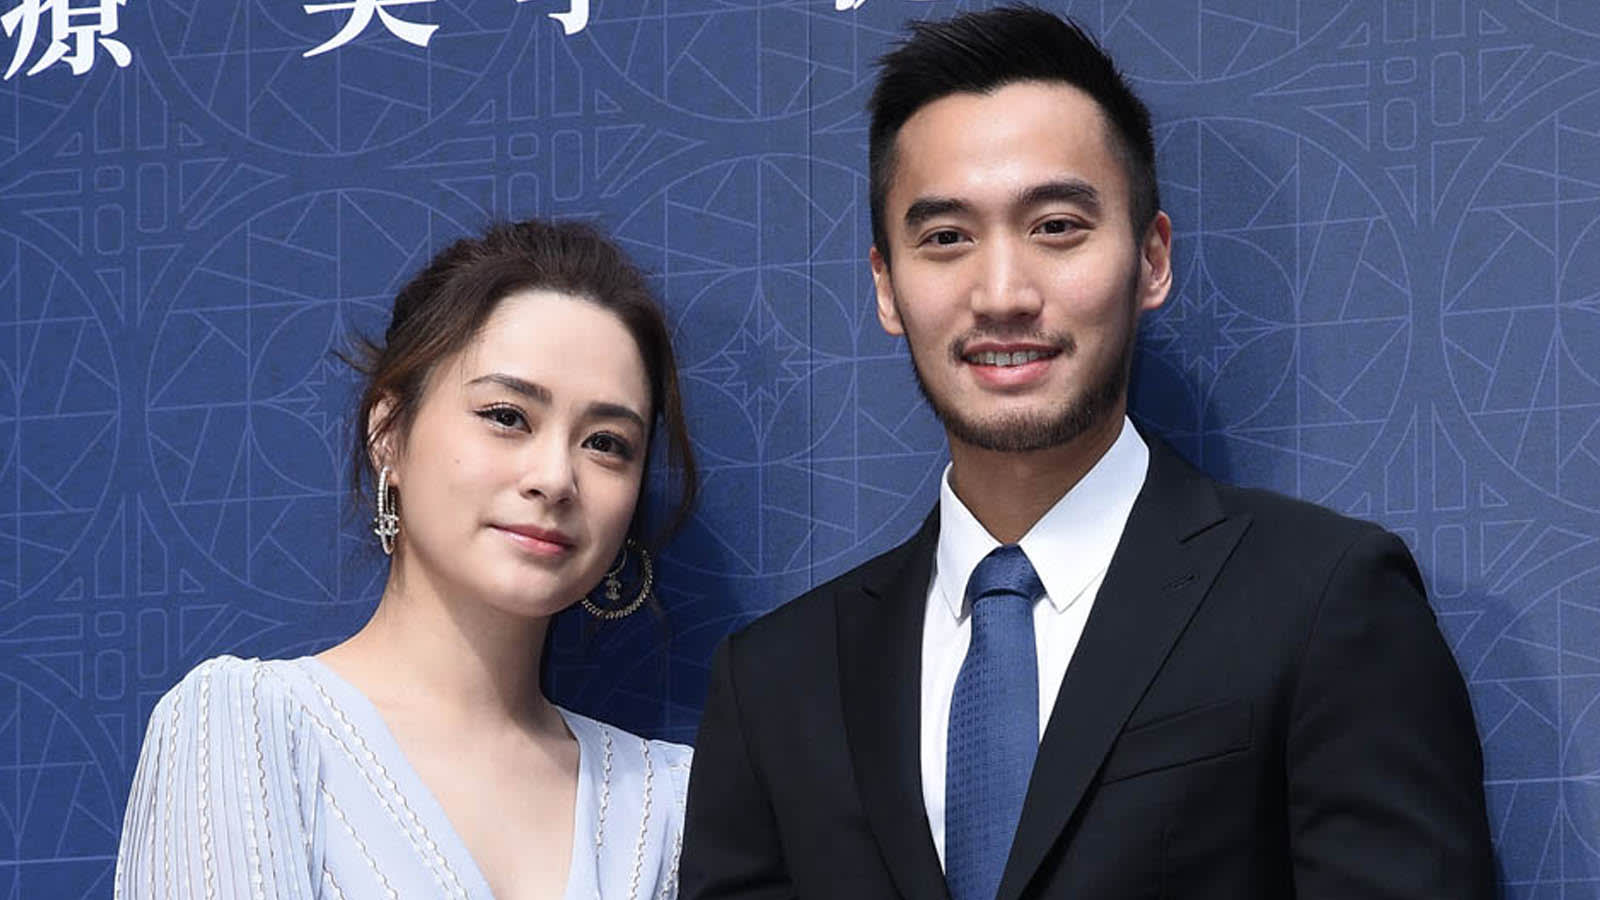 Gillian Chung’s 'Friends' Claim A Non-Existent Sex Life Led To Her Divorce, But Michael Lai’s 'Friends' Say It's 'Cos She Didn't Get Pregnant